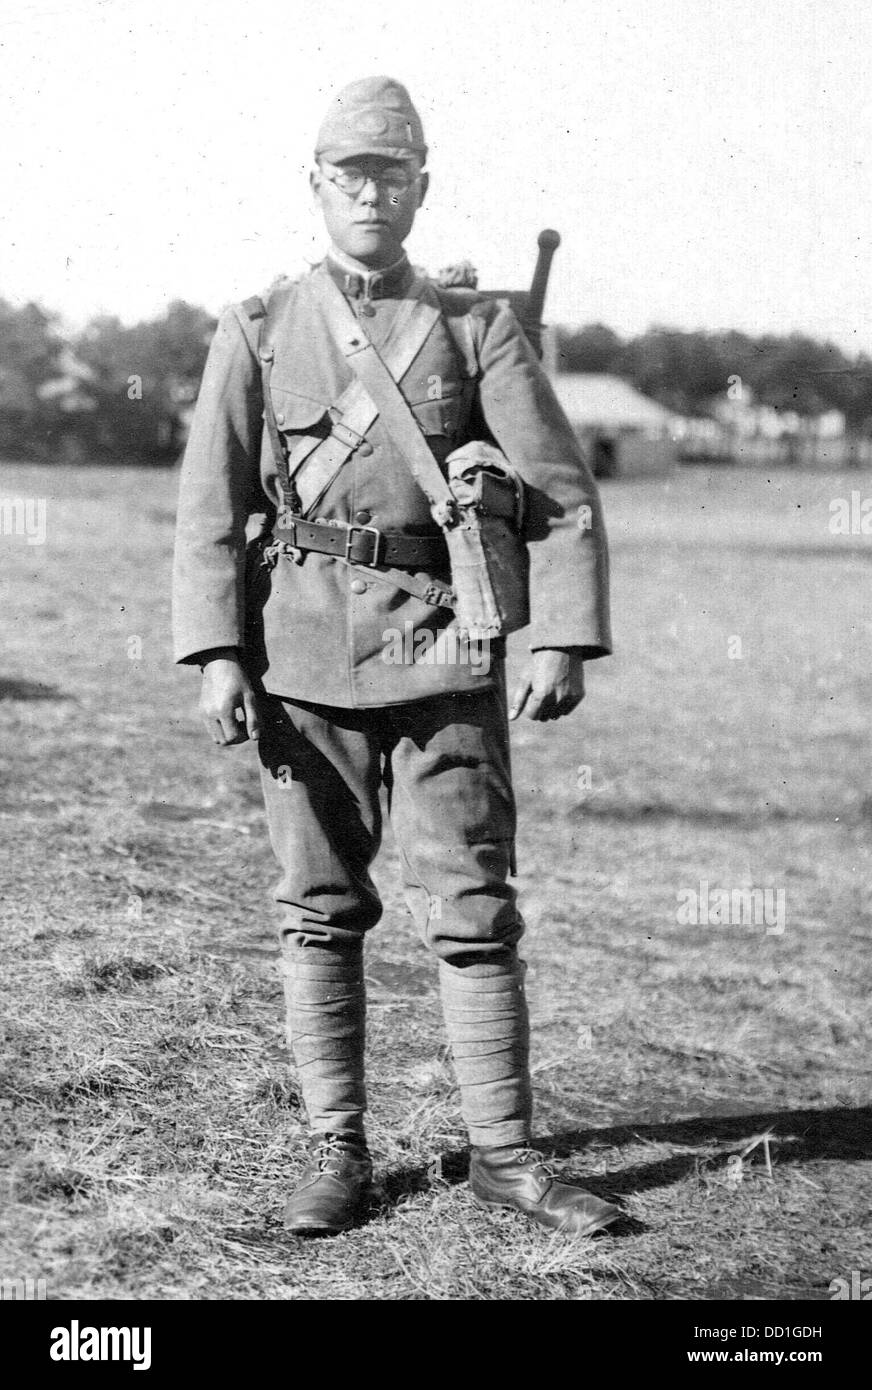 A Japanese soldier of the 1930s in full uniform Stock Photo